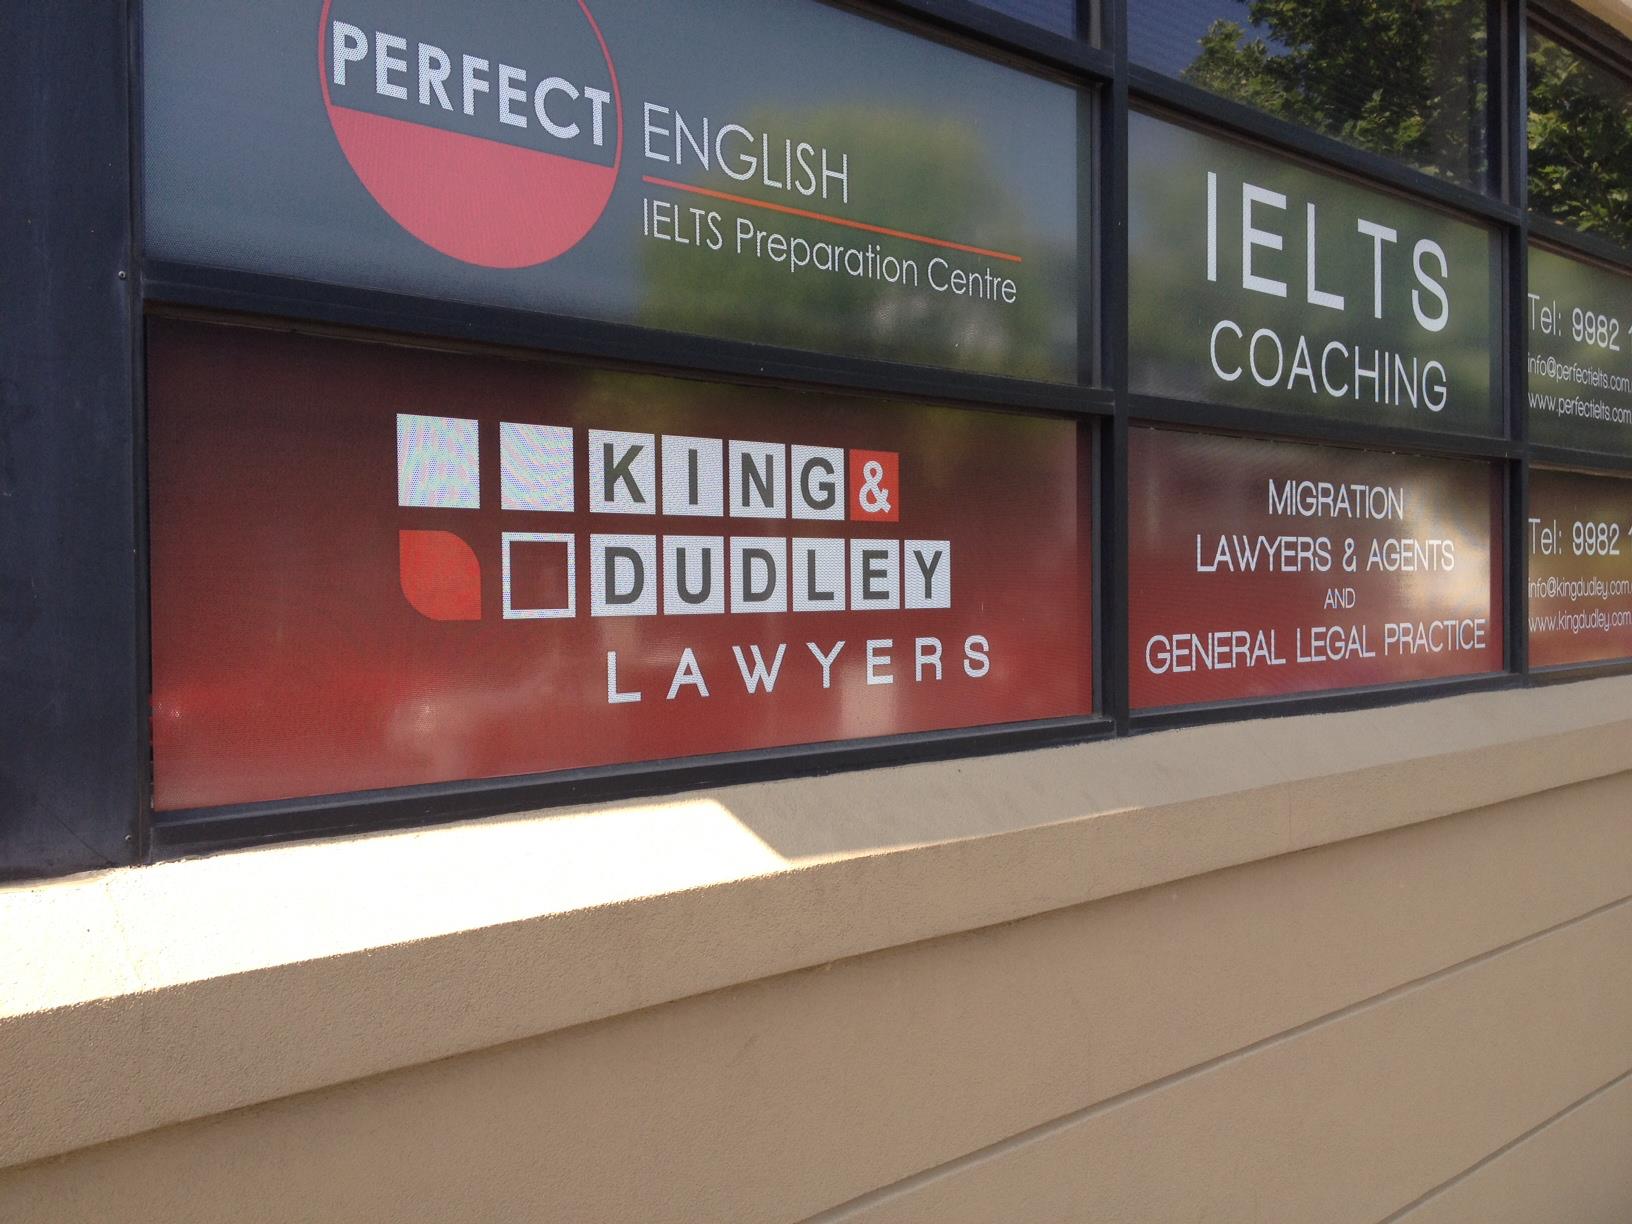 King & Dudley Lawyers